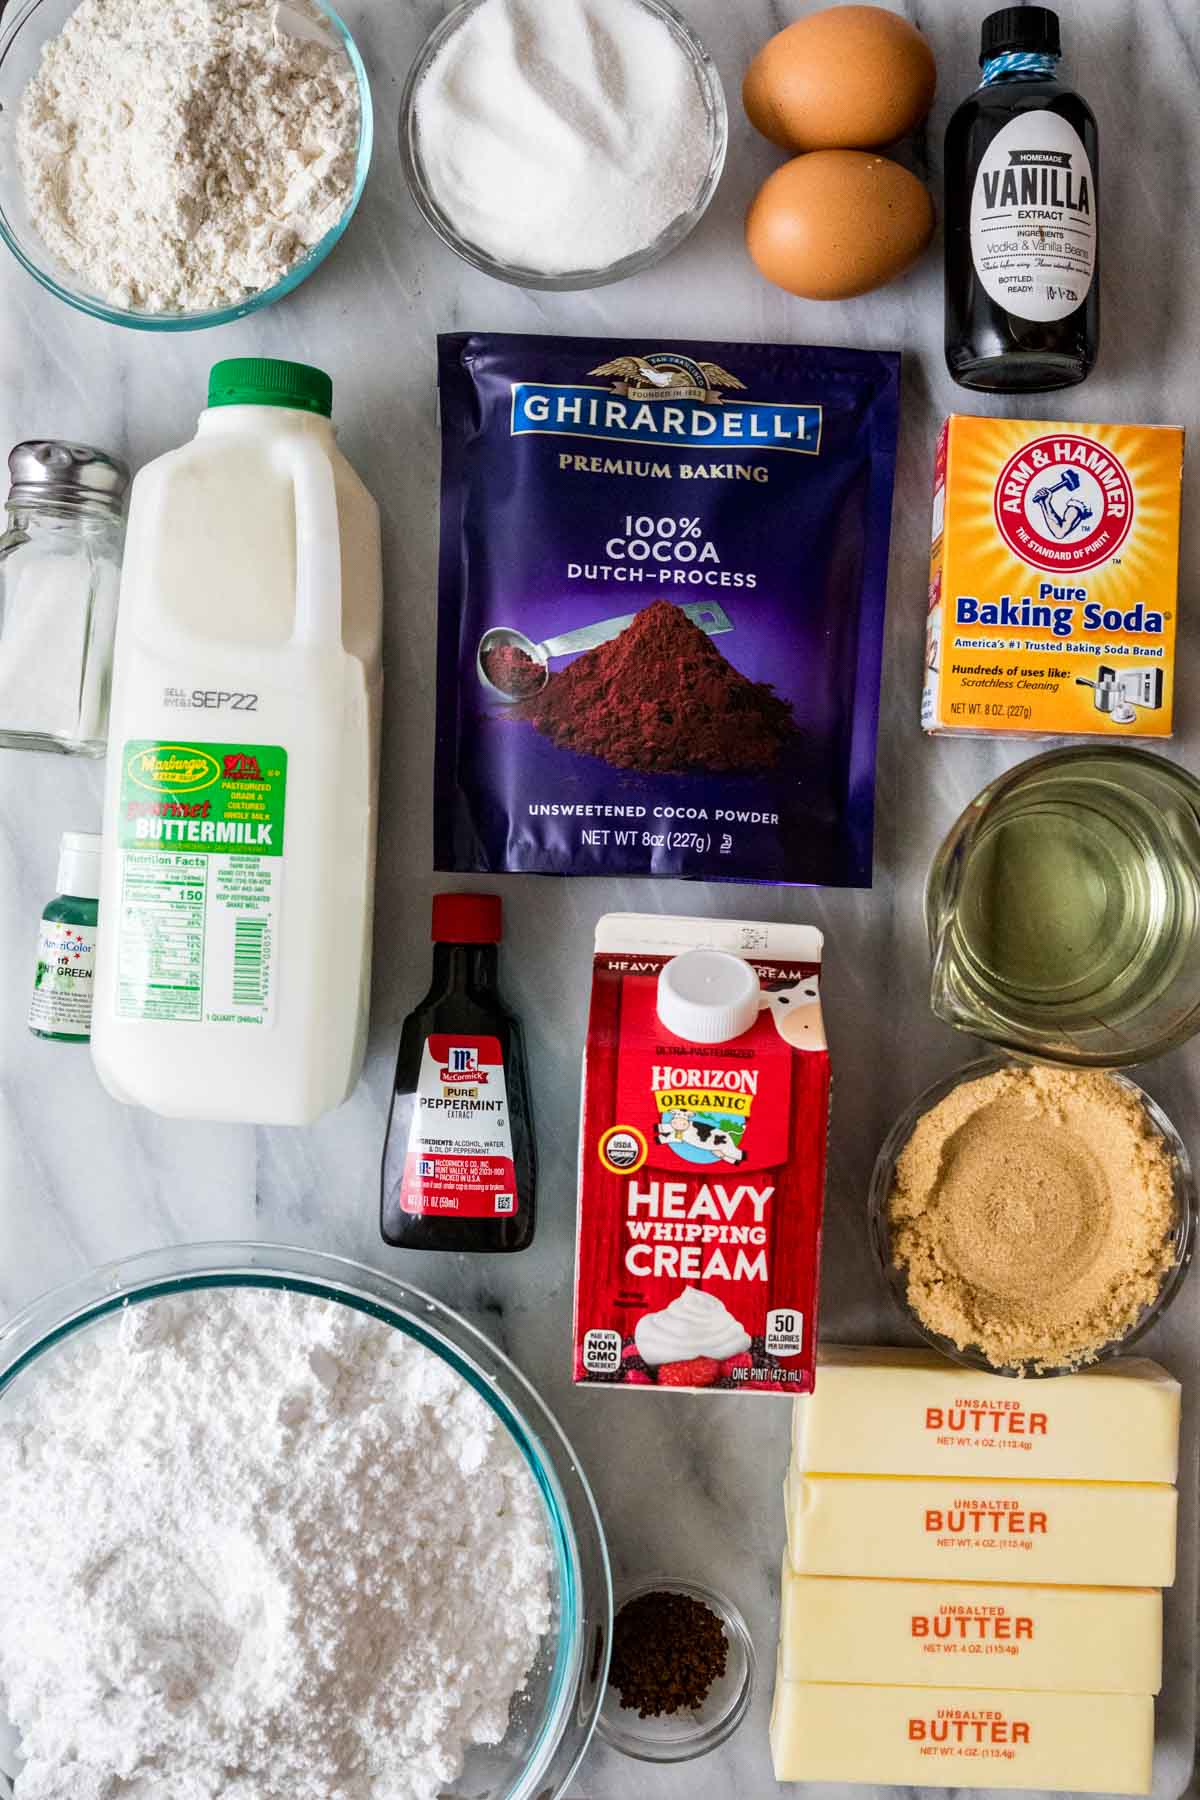 Overhead view of ingredients including cocoa powder, buttermilk, peppermint extract, and more.